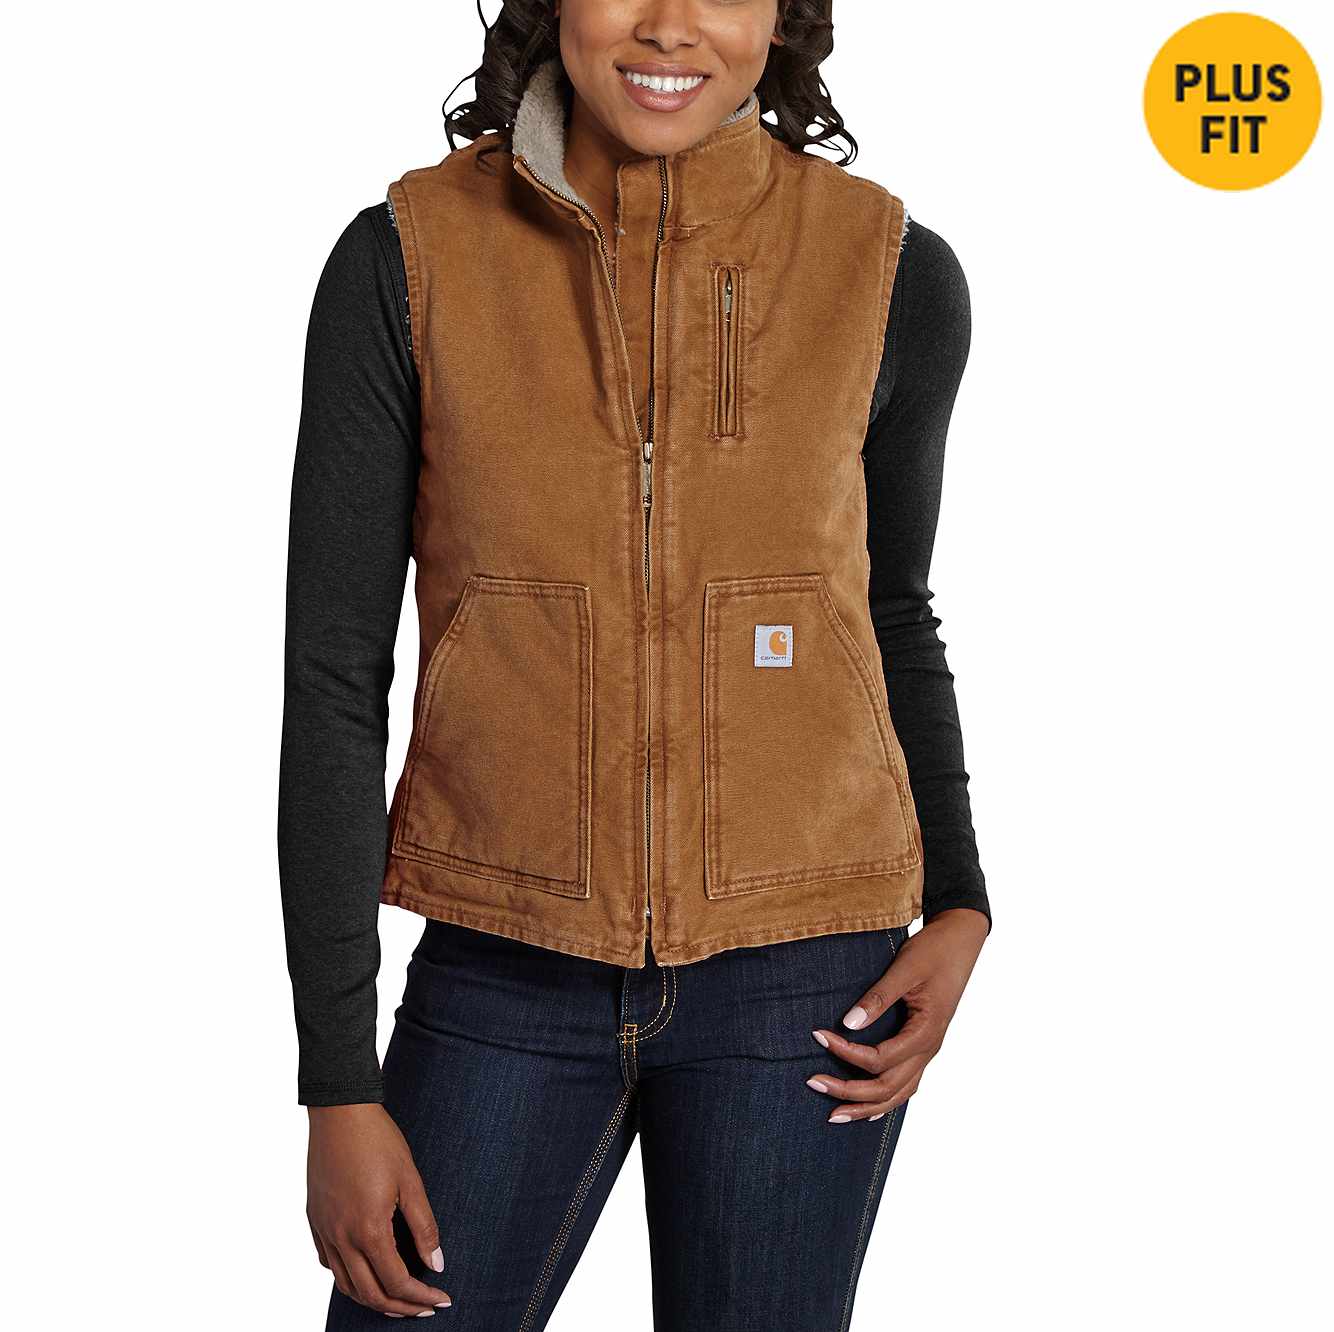 Regular and Plus Sizes Carhartt Womens Mock Neck Sherpa Lined Vest